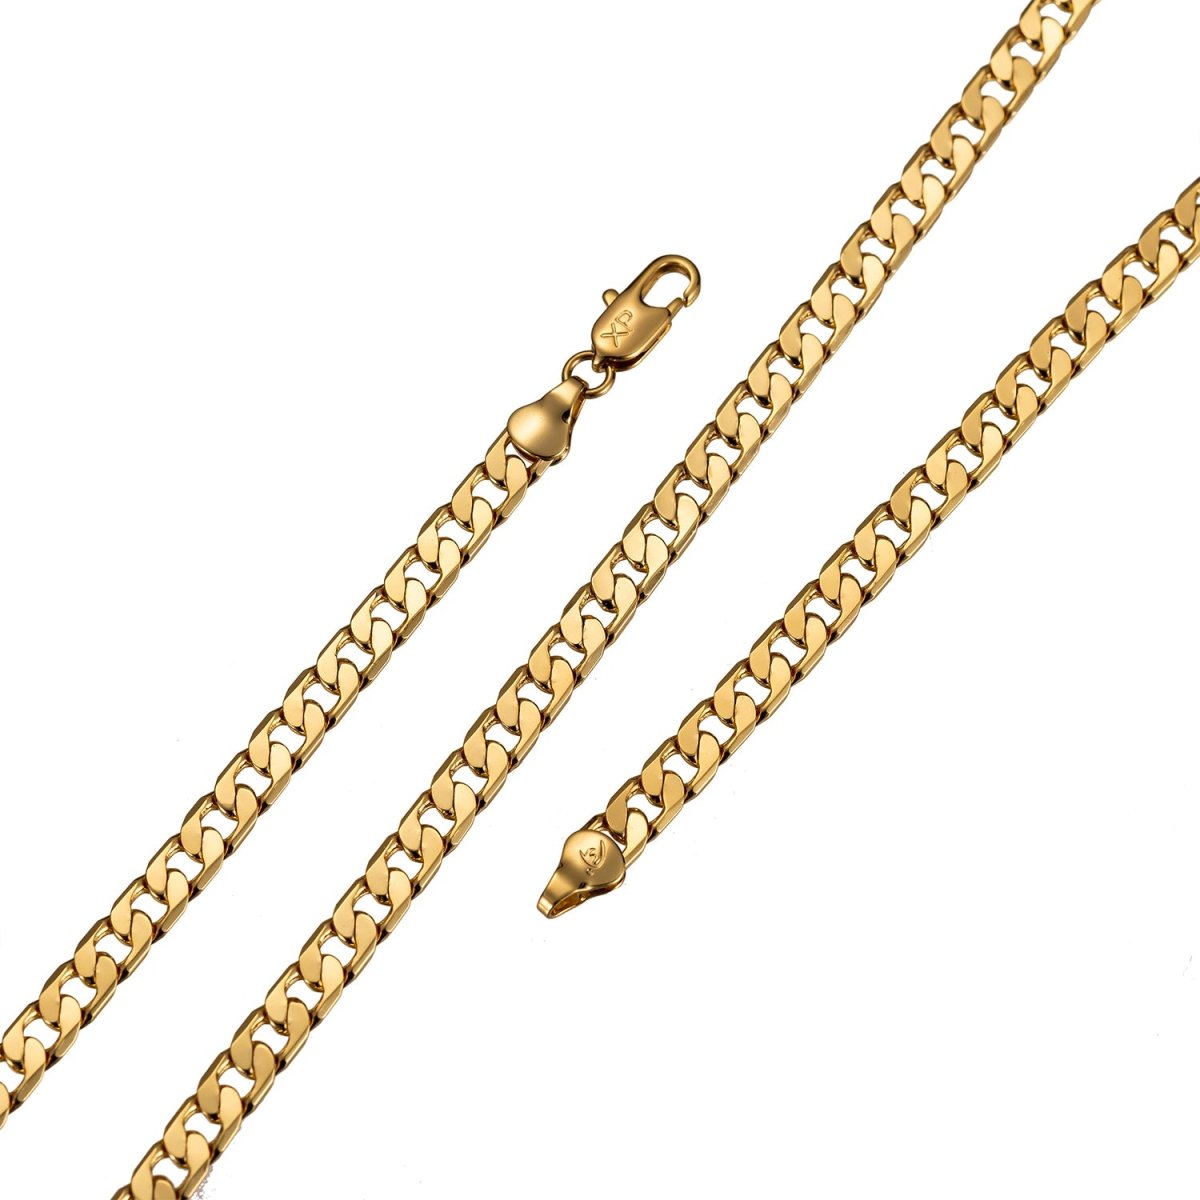 BLOWOUT 19.5 inch Curb Chain Necklace, 24K Gold Plated Finished Chain, 3mm Width Curb Necklace w/Lobster Clasps | CN-522 Clearance Pricing - DLUXCA